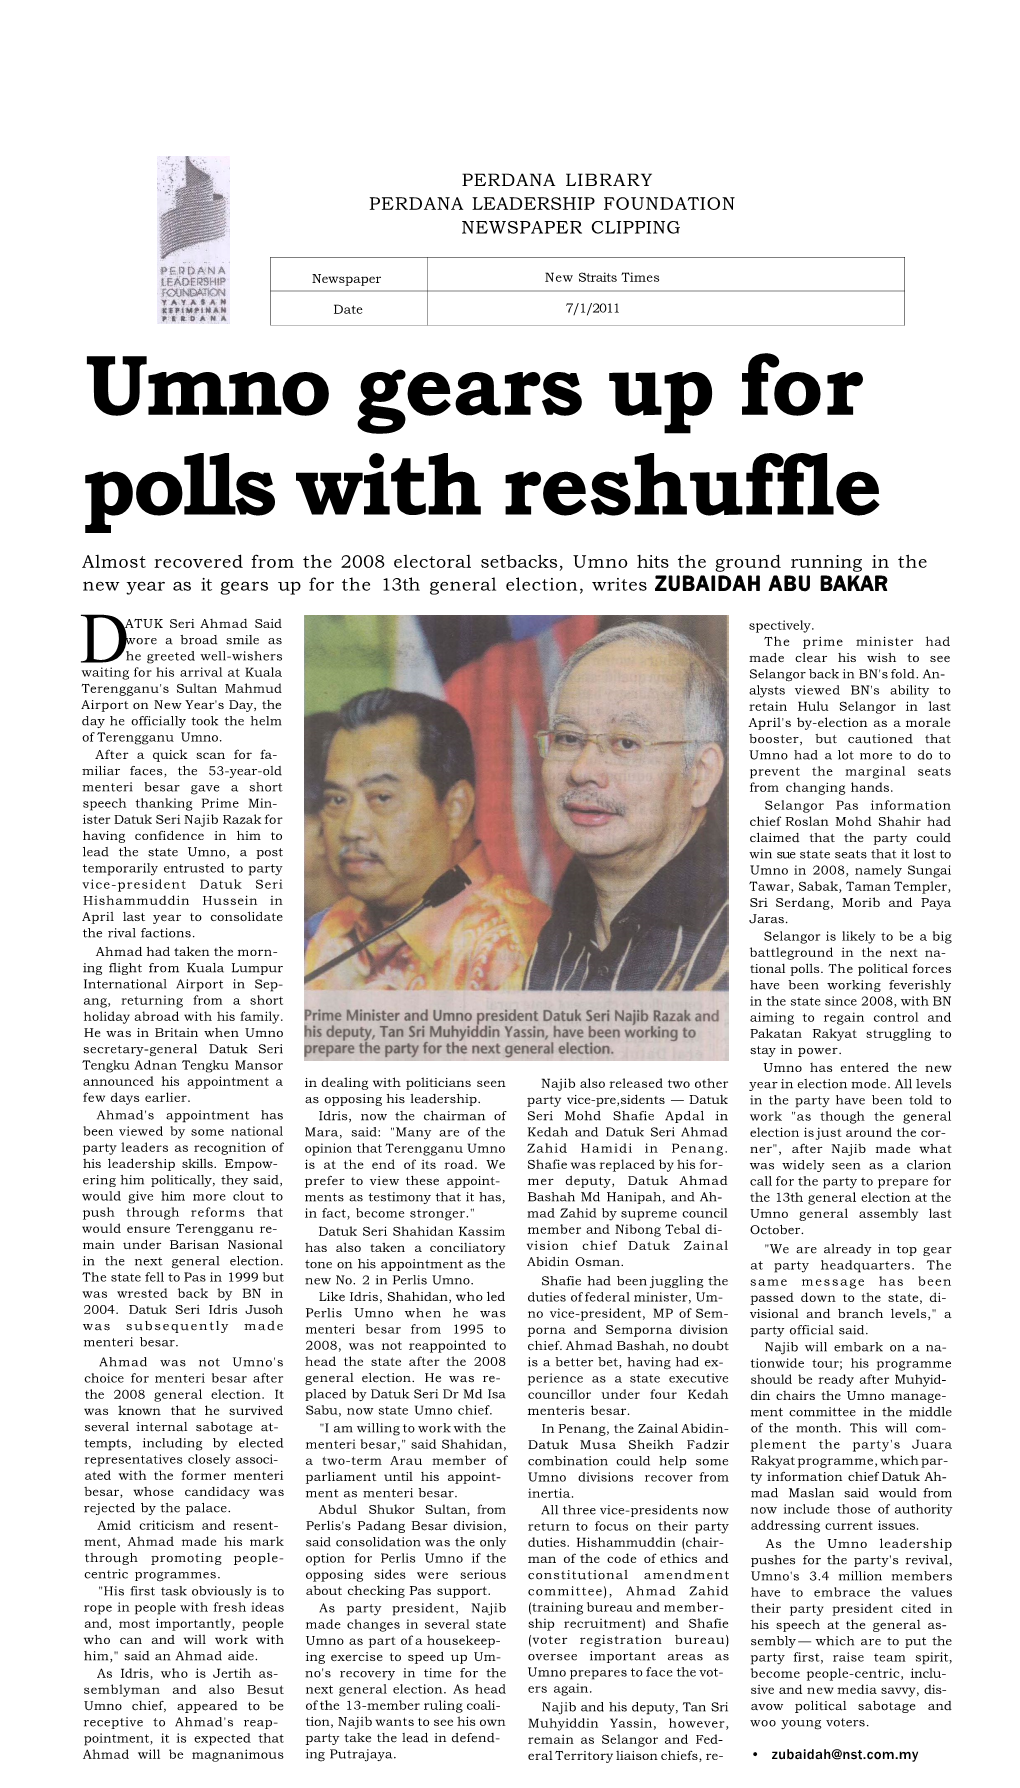 Umno Gears up for Polls with Reshuffle